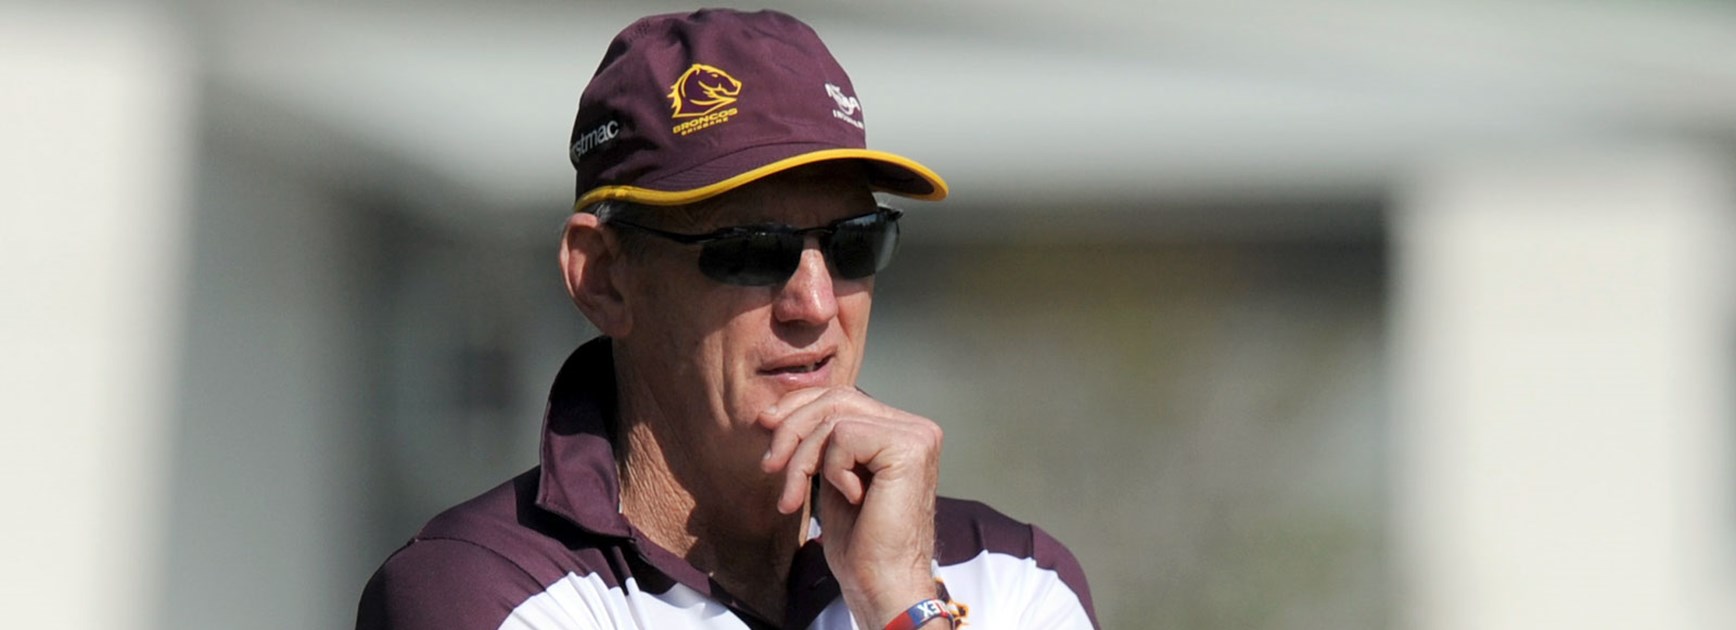 Returning club legend Wayne Bennett is out to start a new era of success at the Broncos.